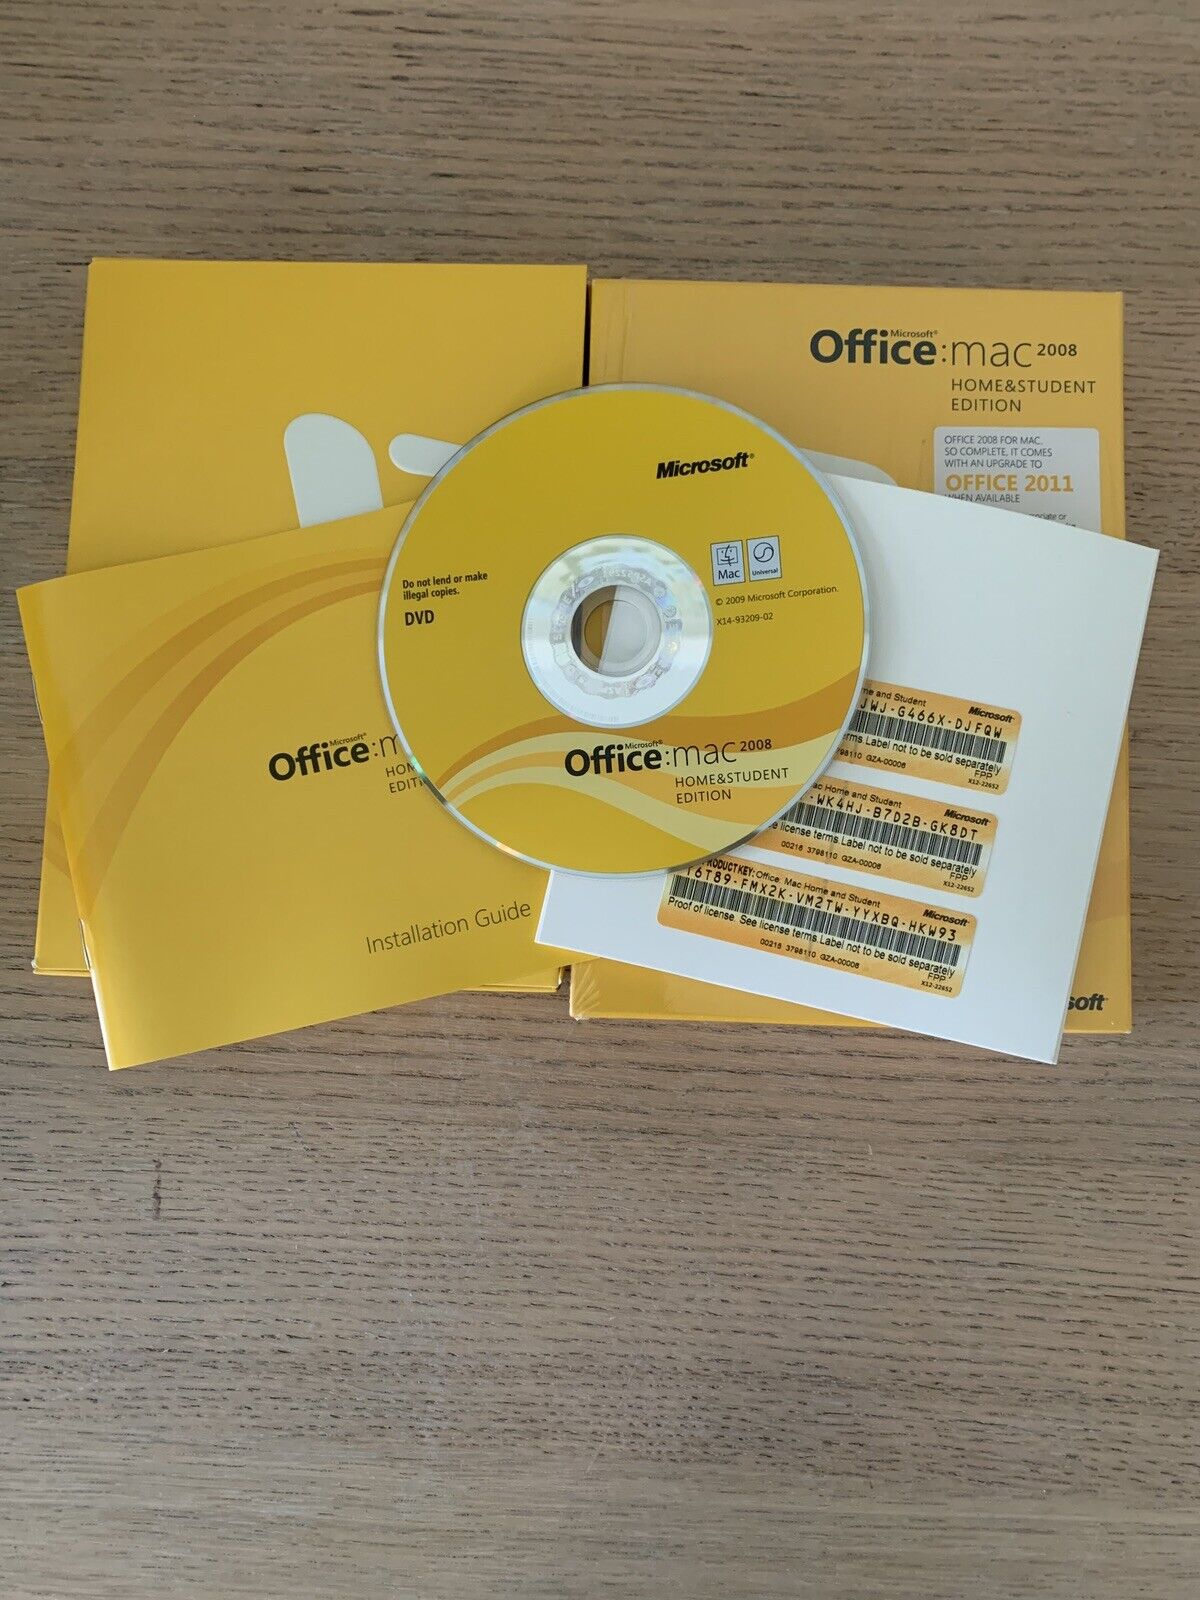 Microsoft Office 2008 Home & Student Edition 2008 for Mac W 3 product keys